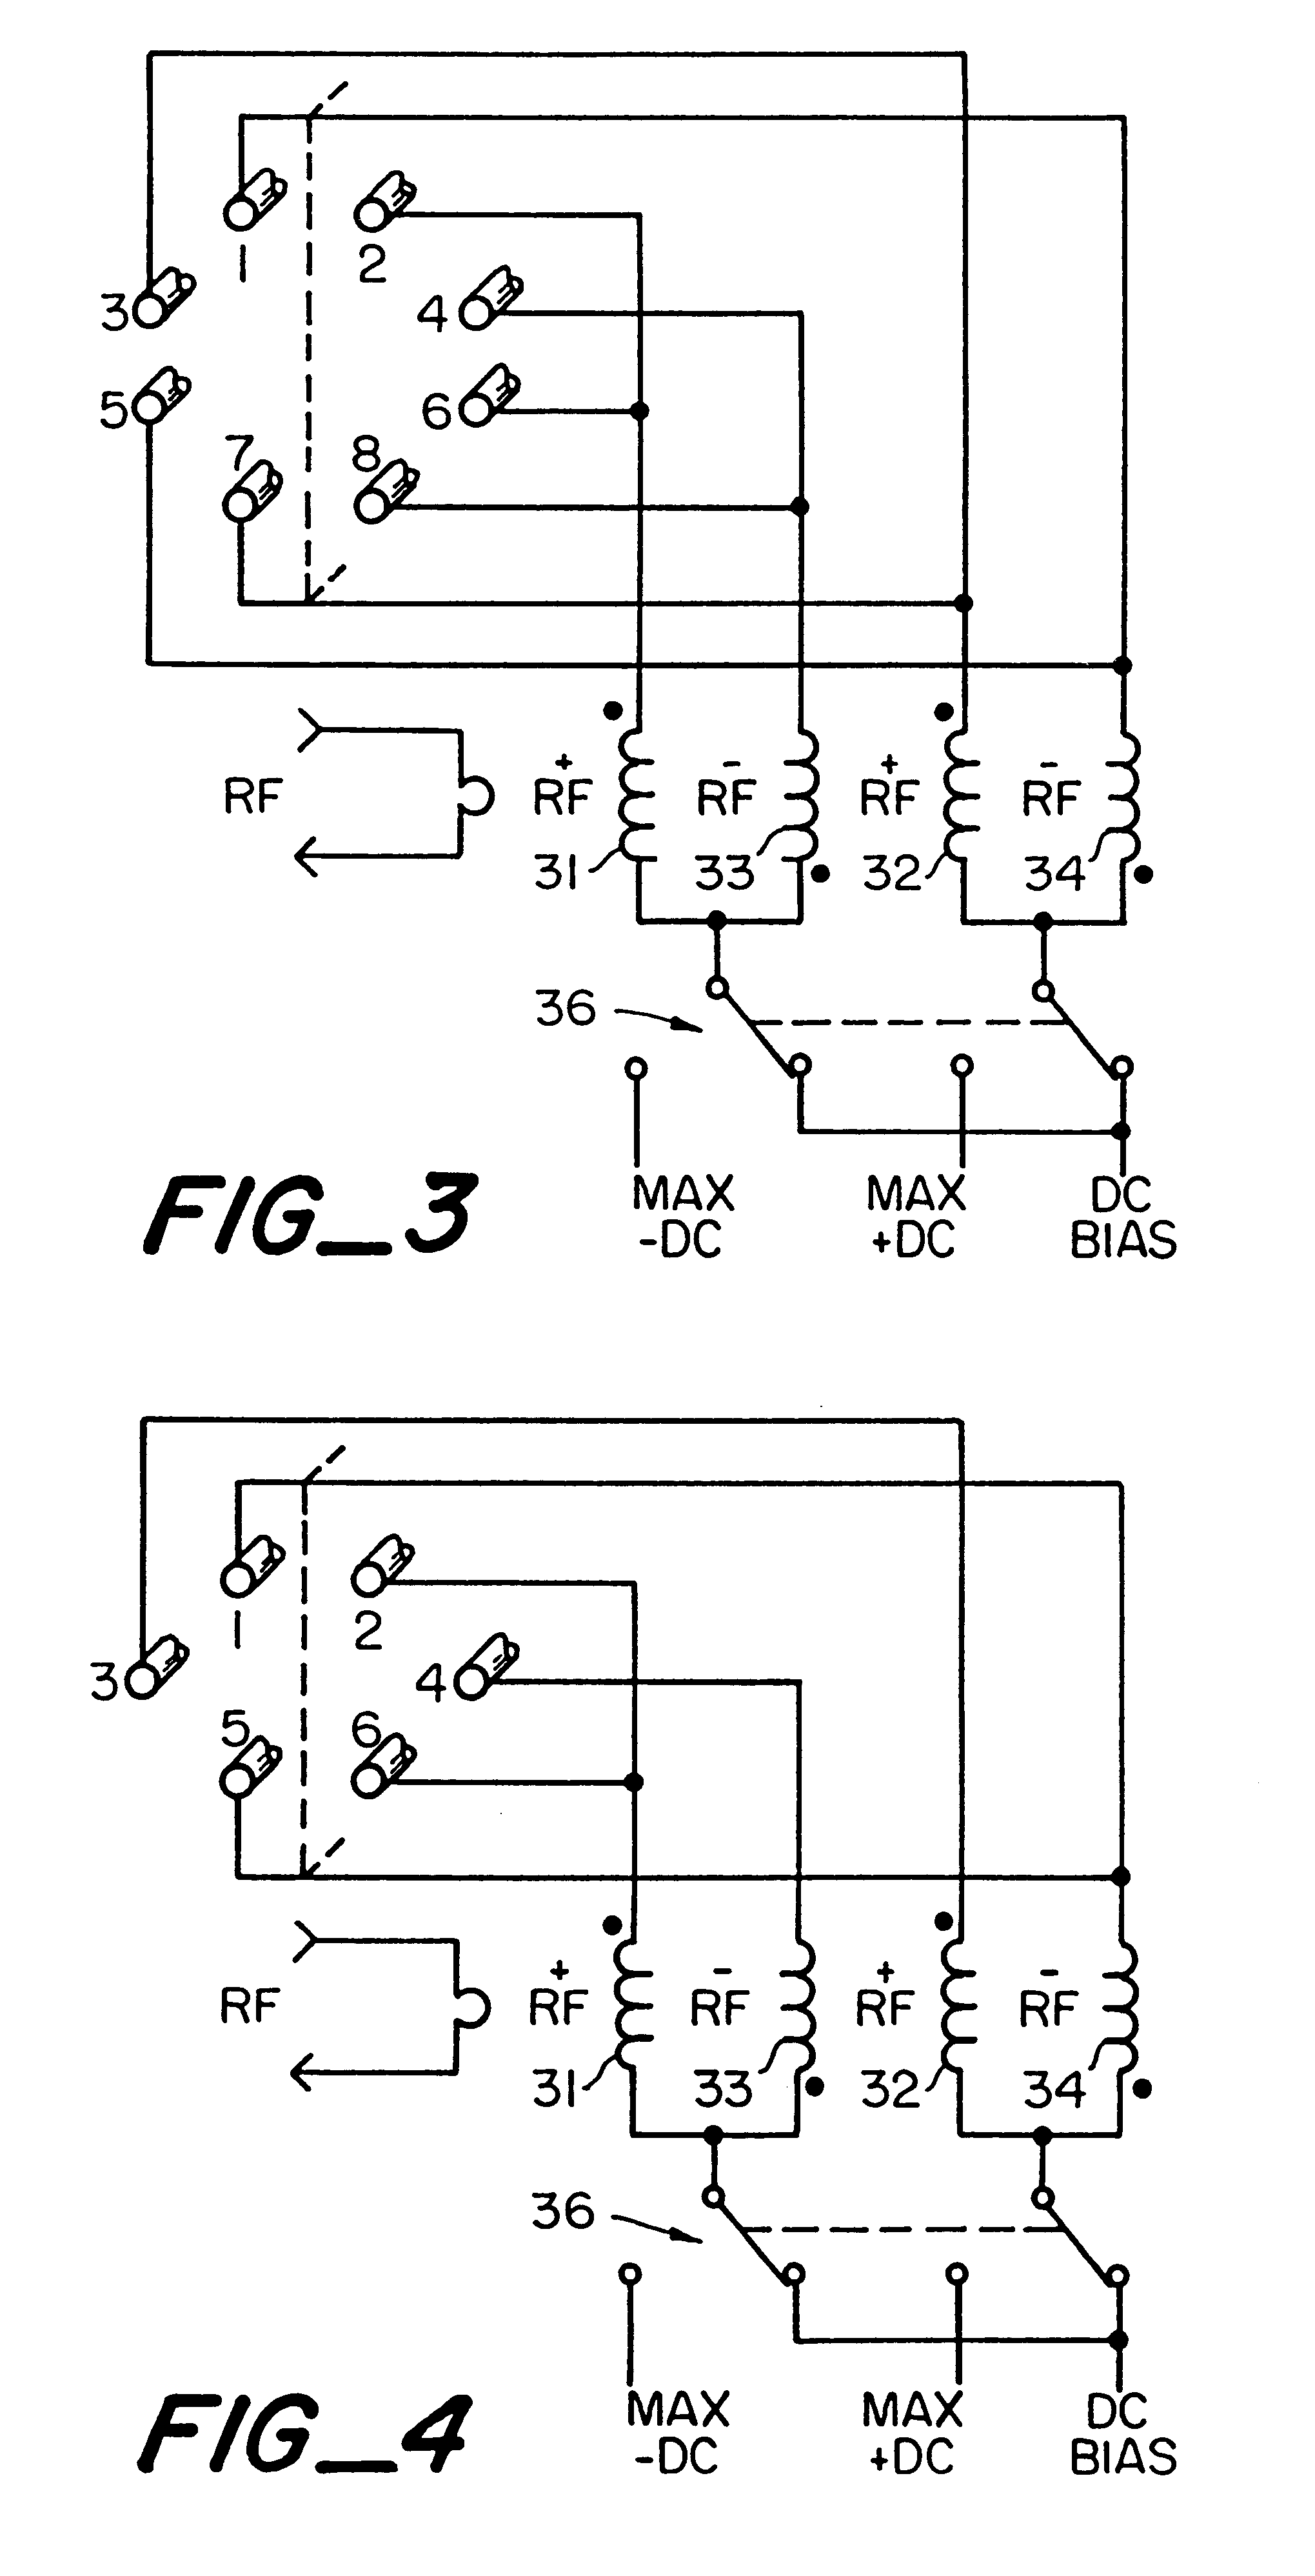 Method and apparatus for transferring ions from an atmospheric pressure ion source into an ion trap mass spectrometer